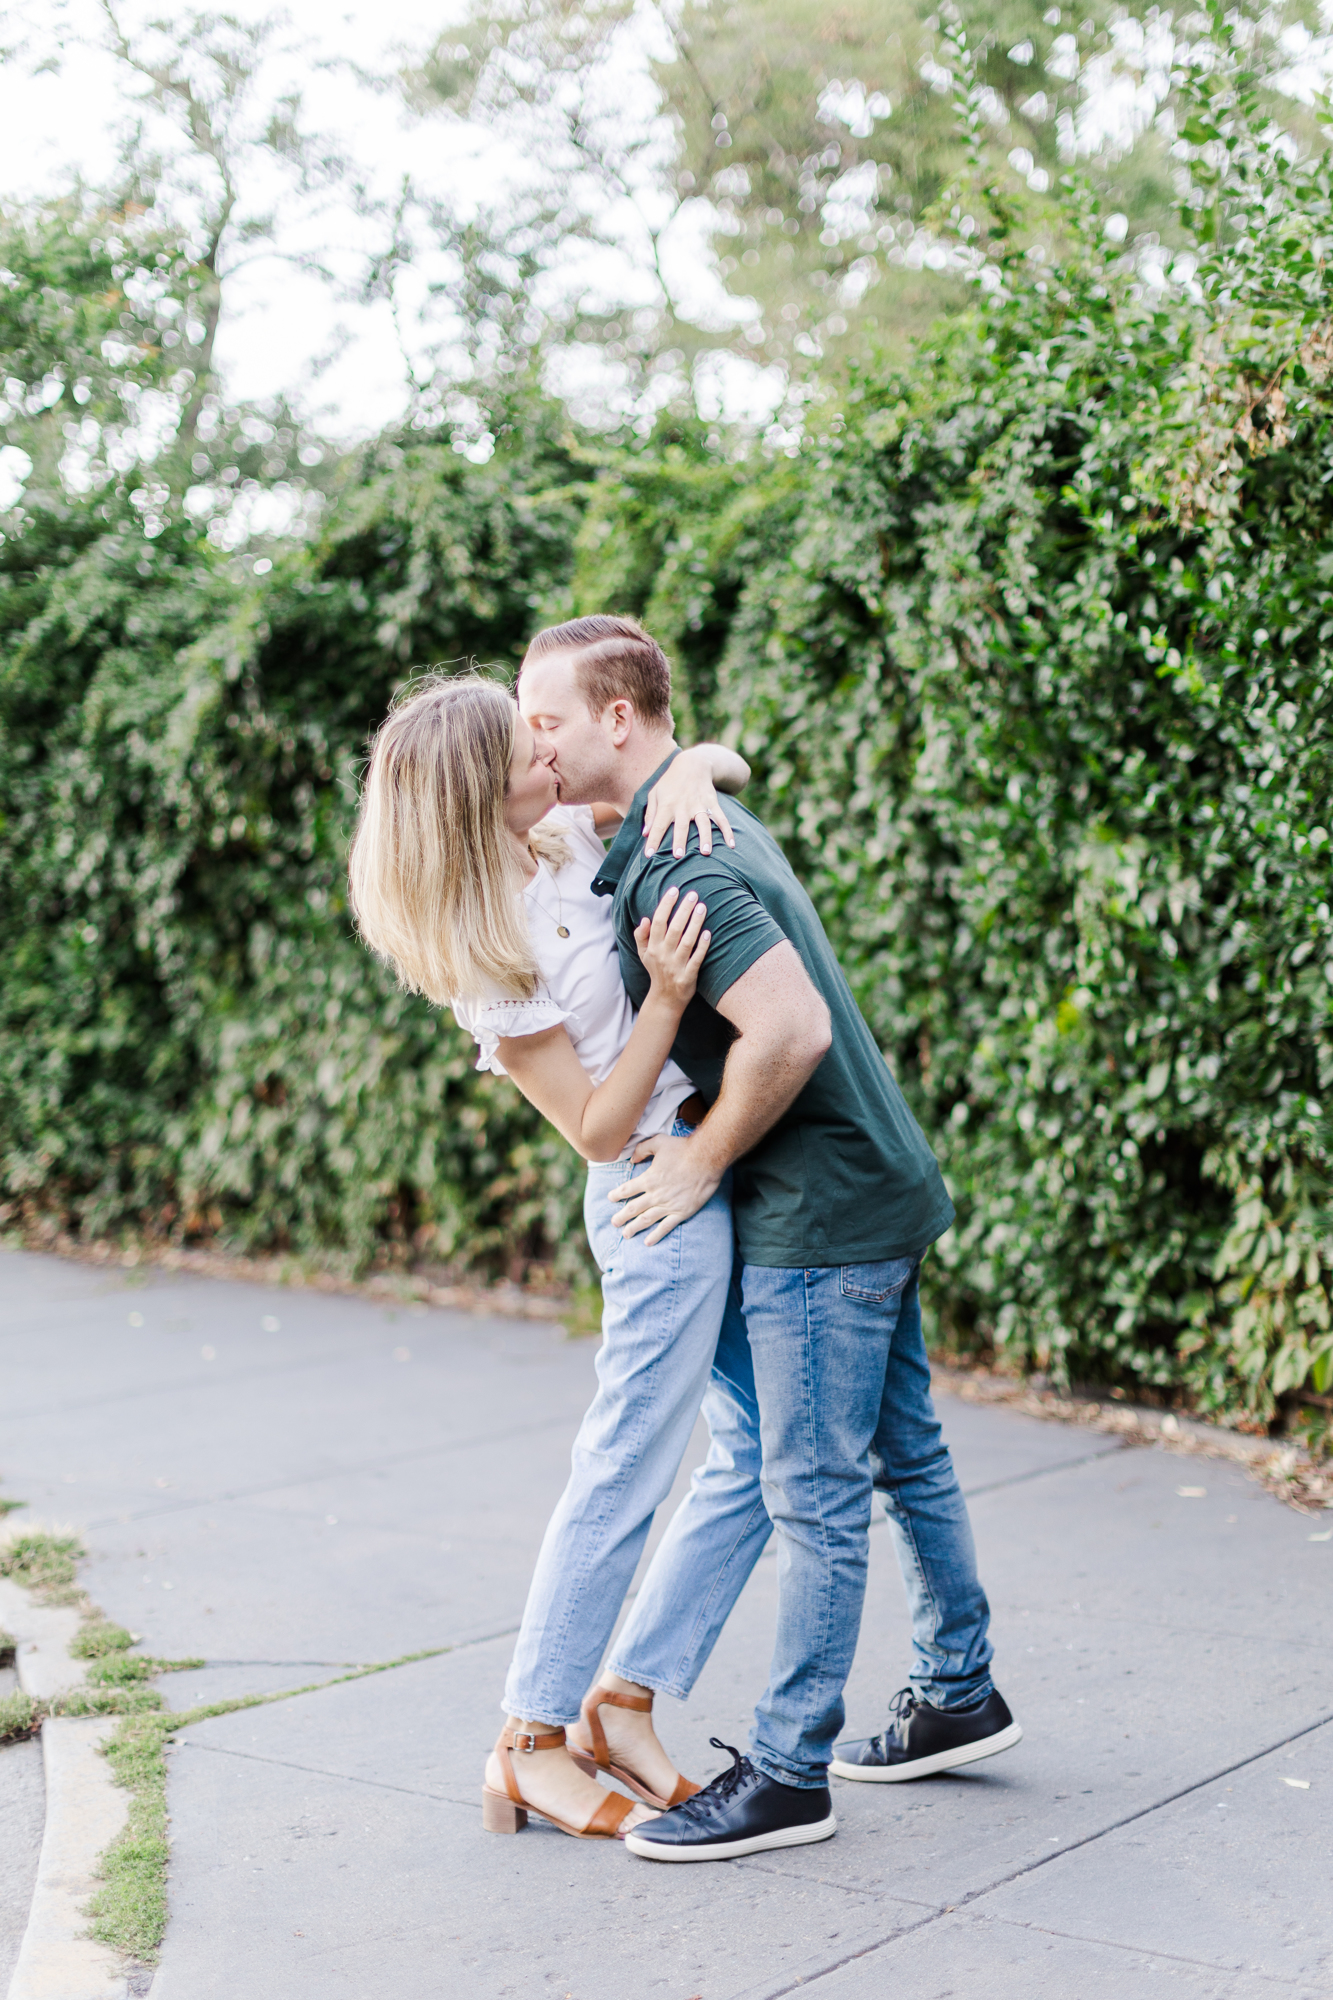 Incredible Pose Ideas for your Engagement Session